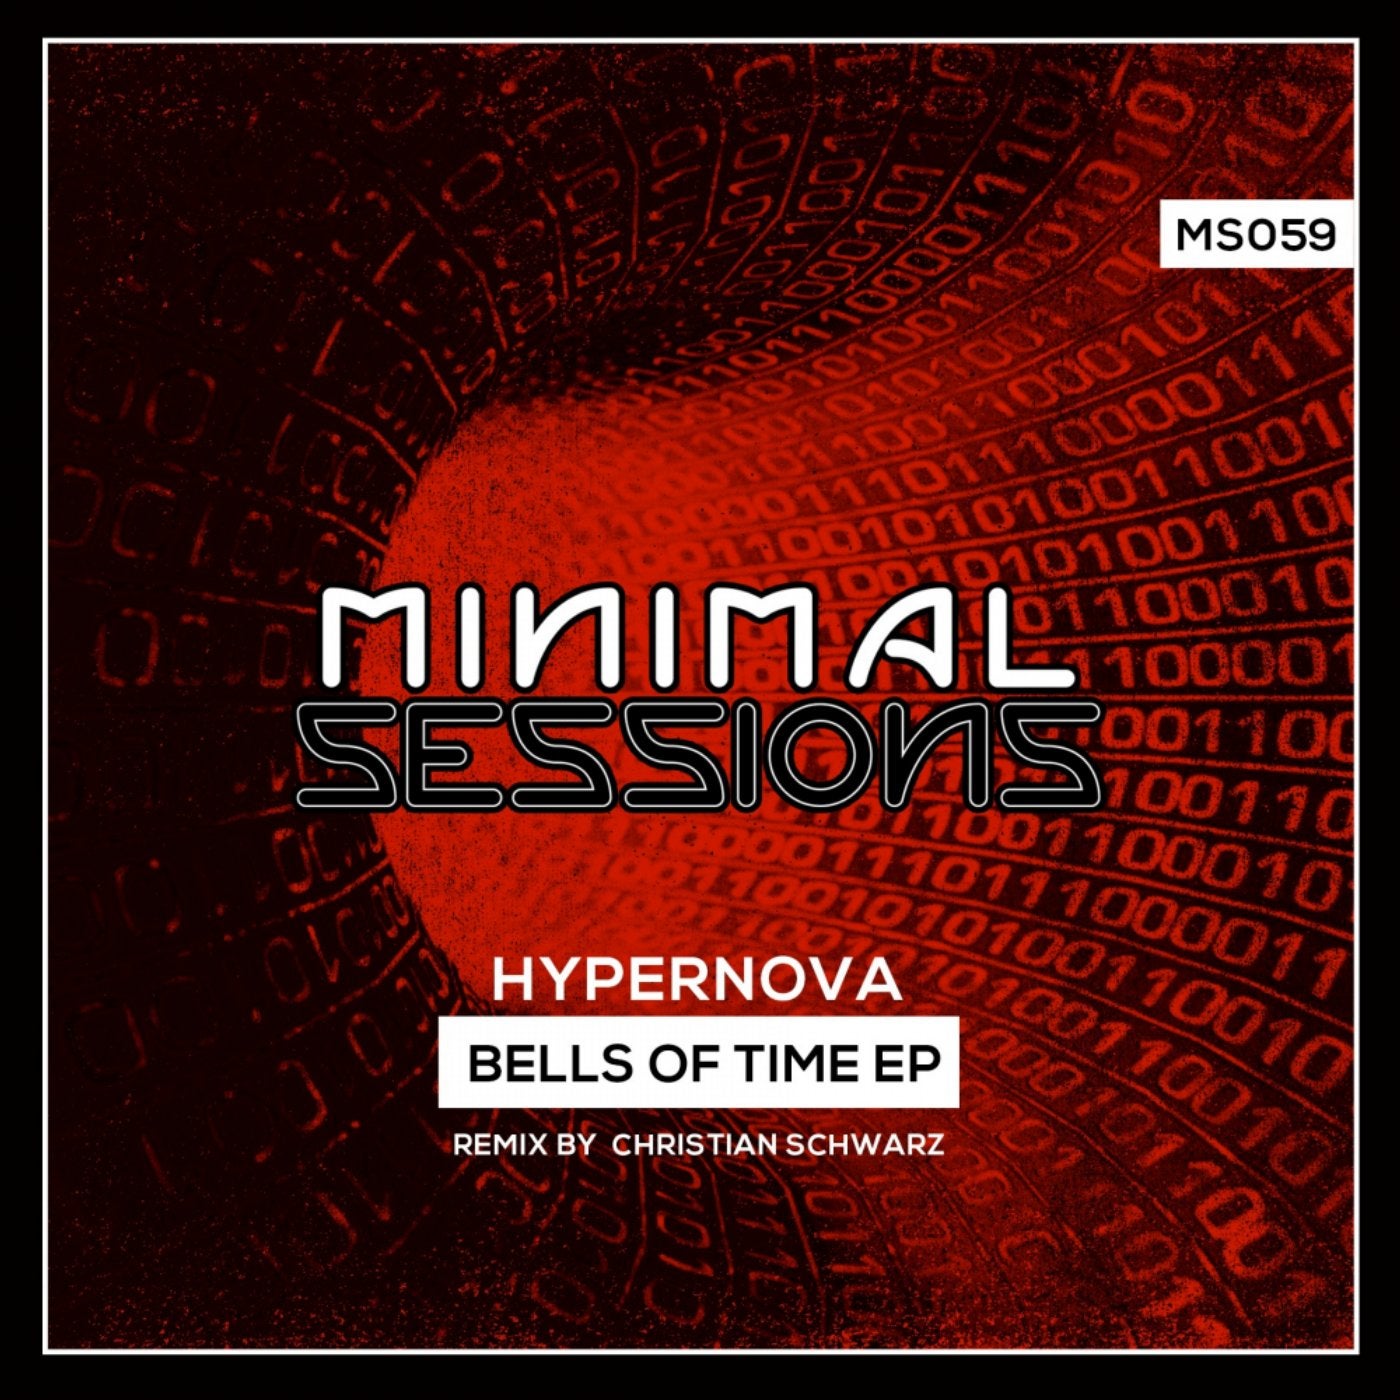 Bells of Time EP